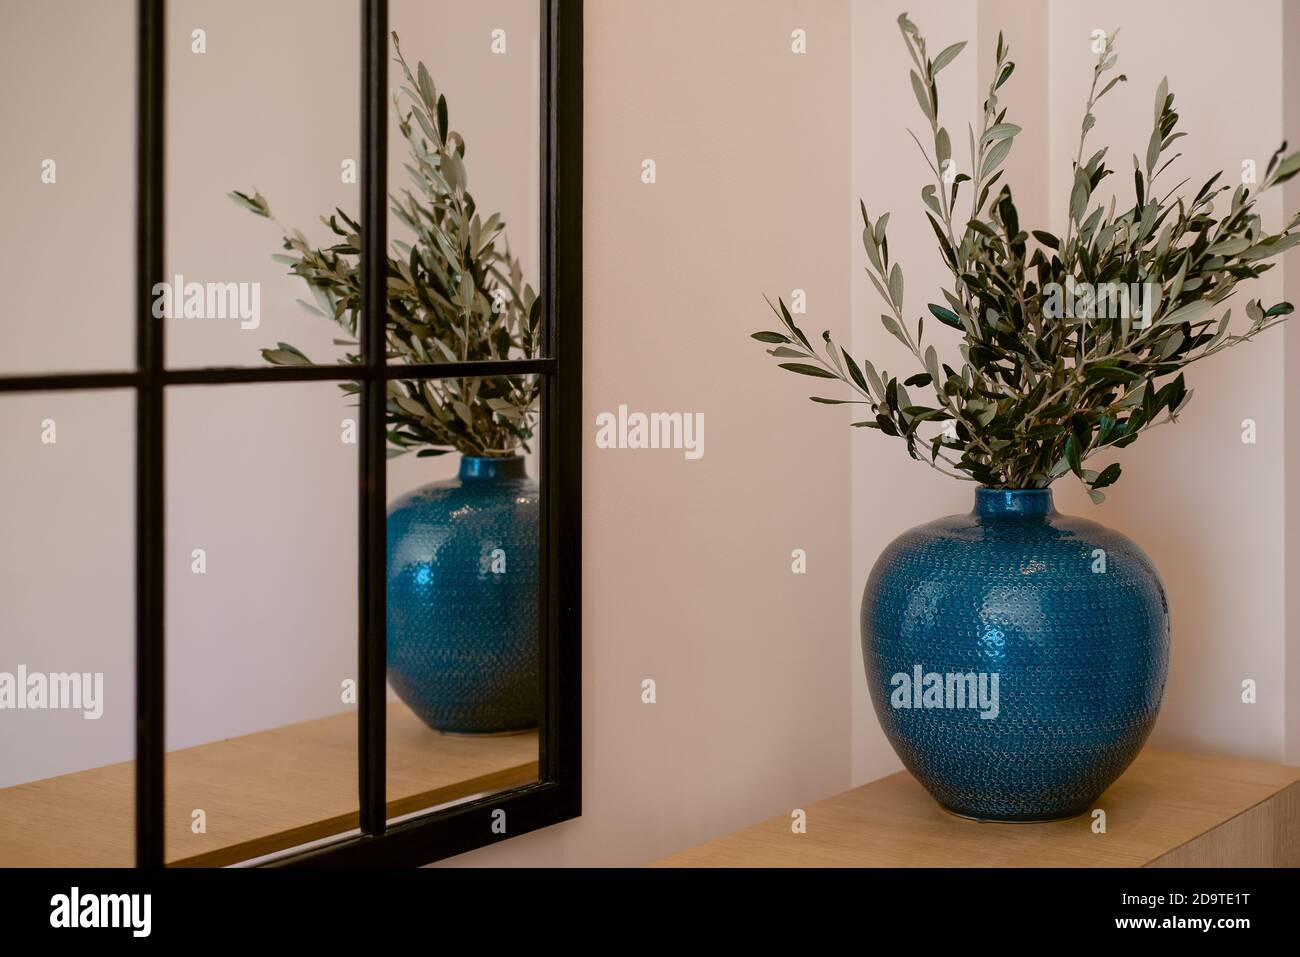 Blue vase stands near the mirror in the interior Stock Photo